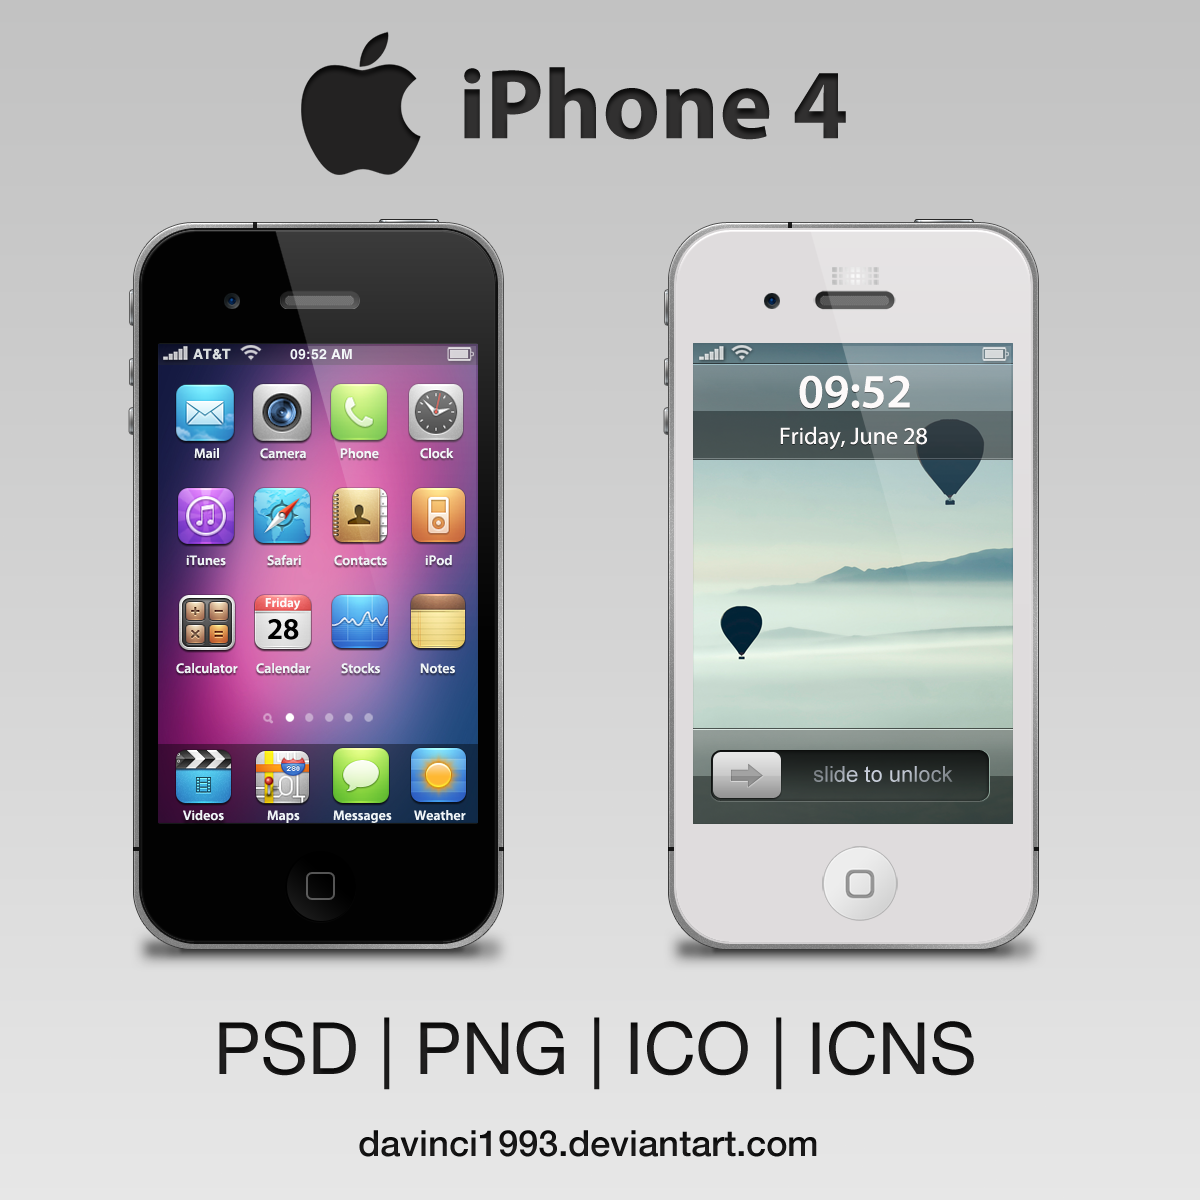 apple_iphone_4__psd___png___ico___icns_by_davinci1993-d362spv.png